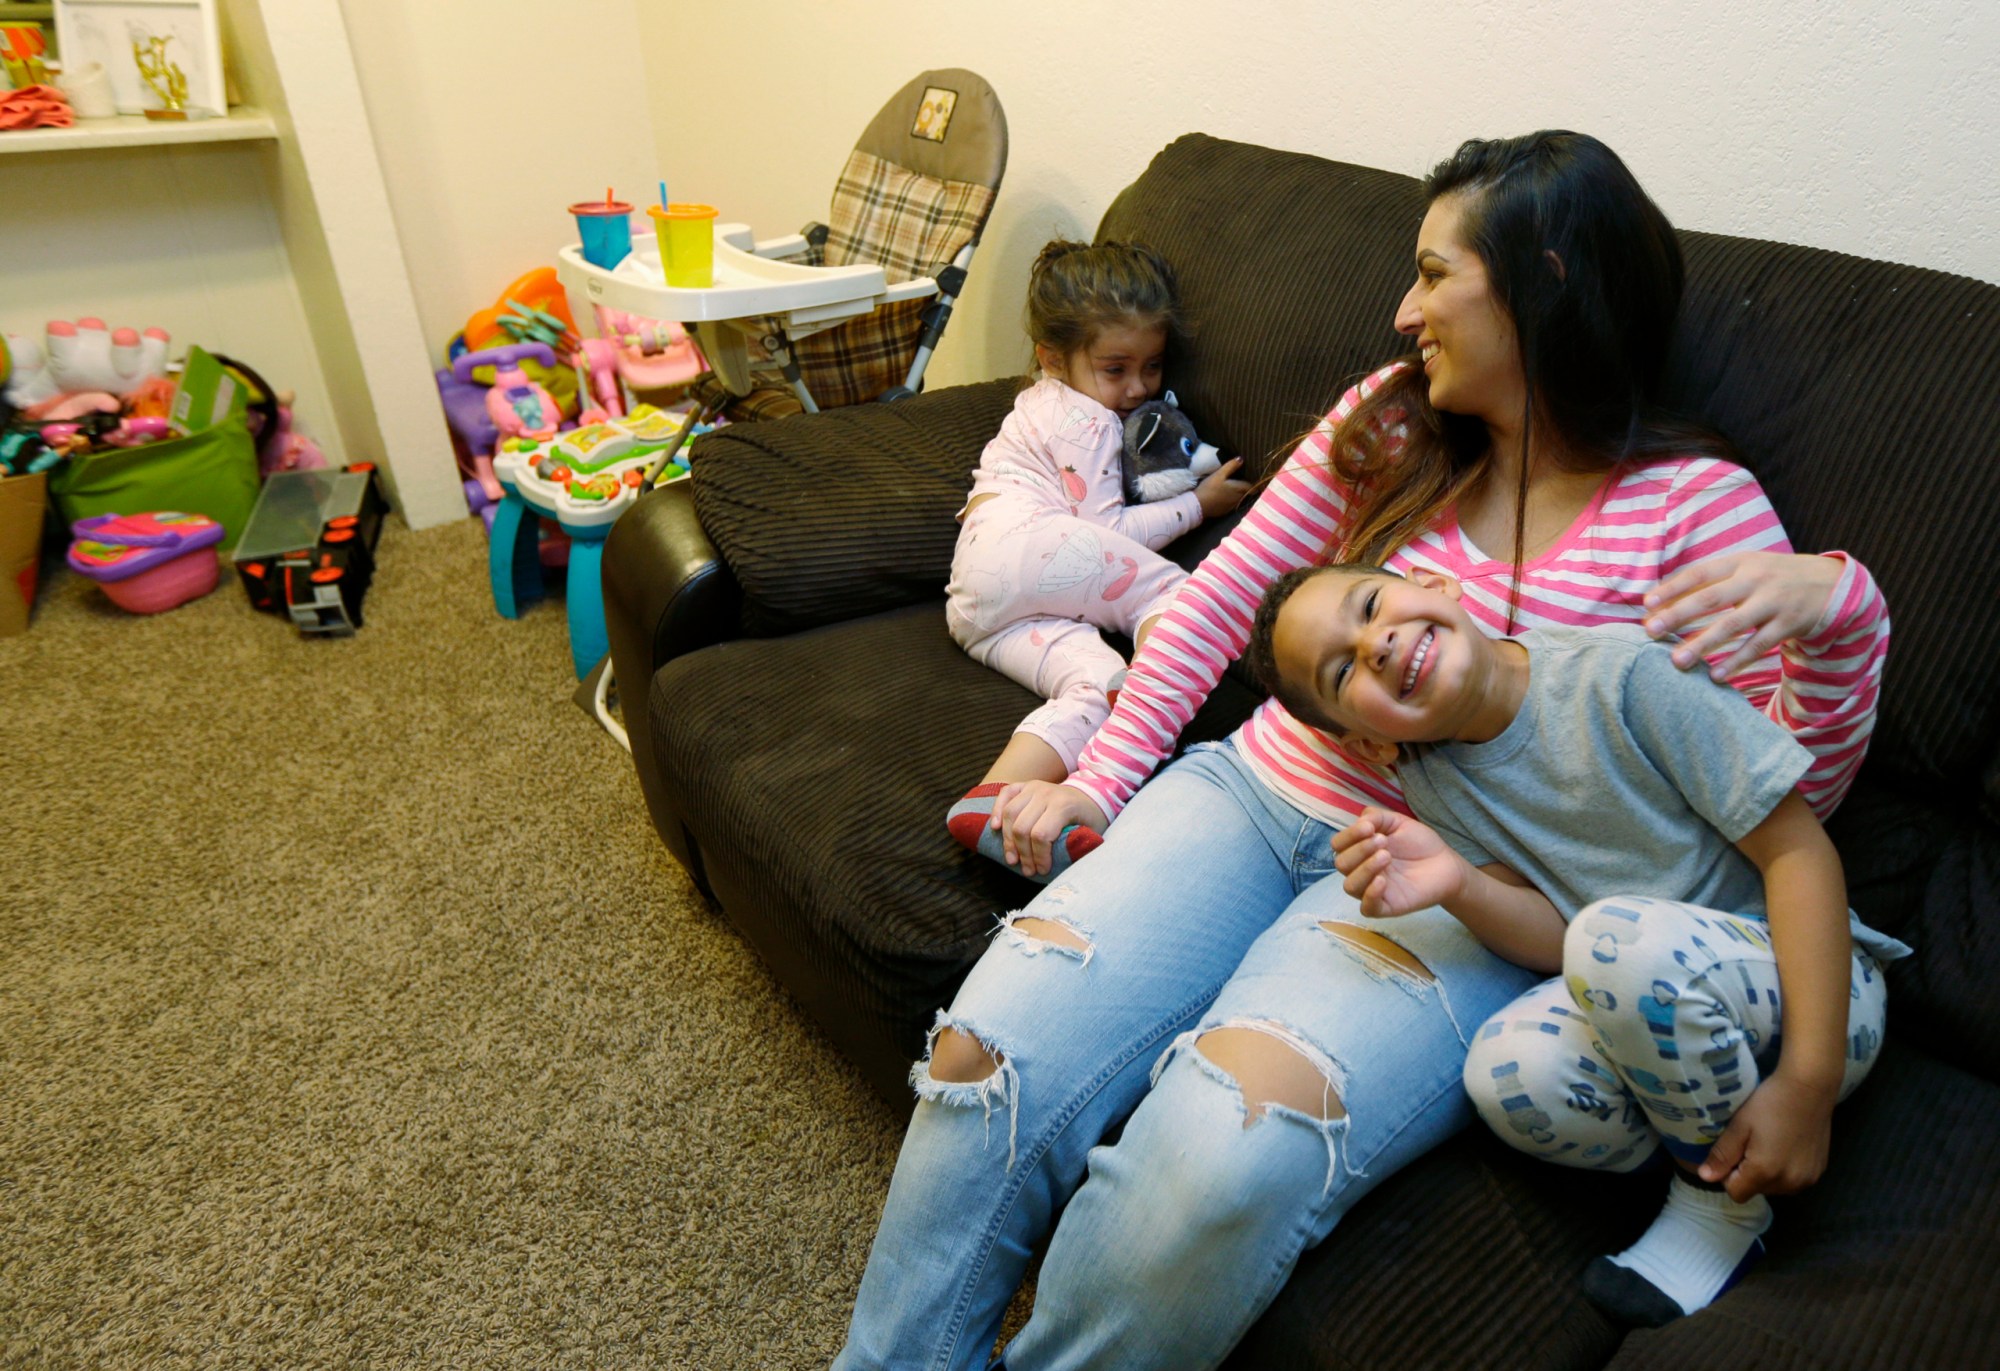 Danielle Mendoza helps her children get ready for bed in her apartment in Renton, Washington, on October 6, 2016. (AP/Ted S. Warren)